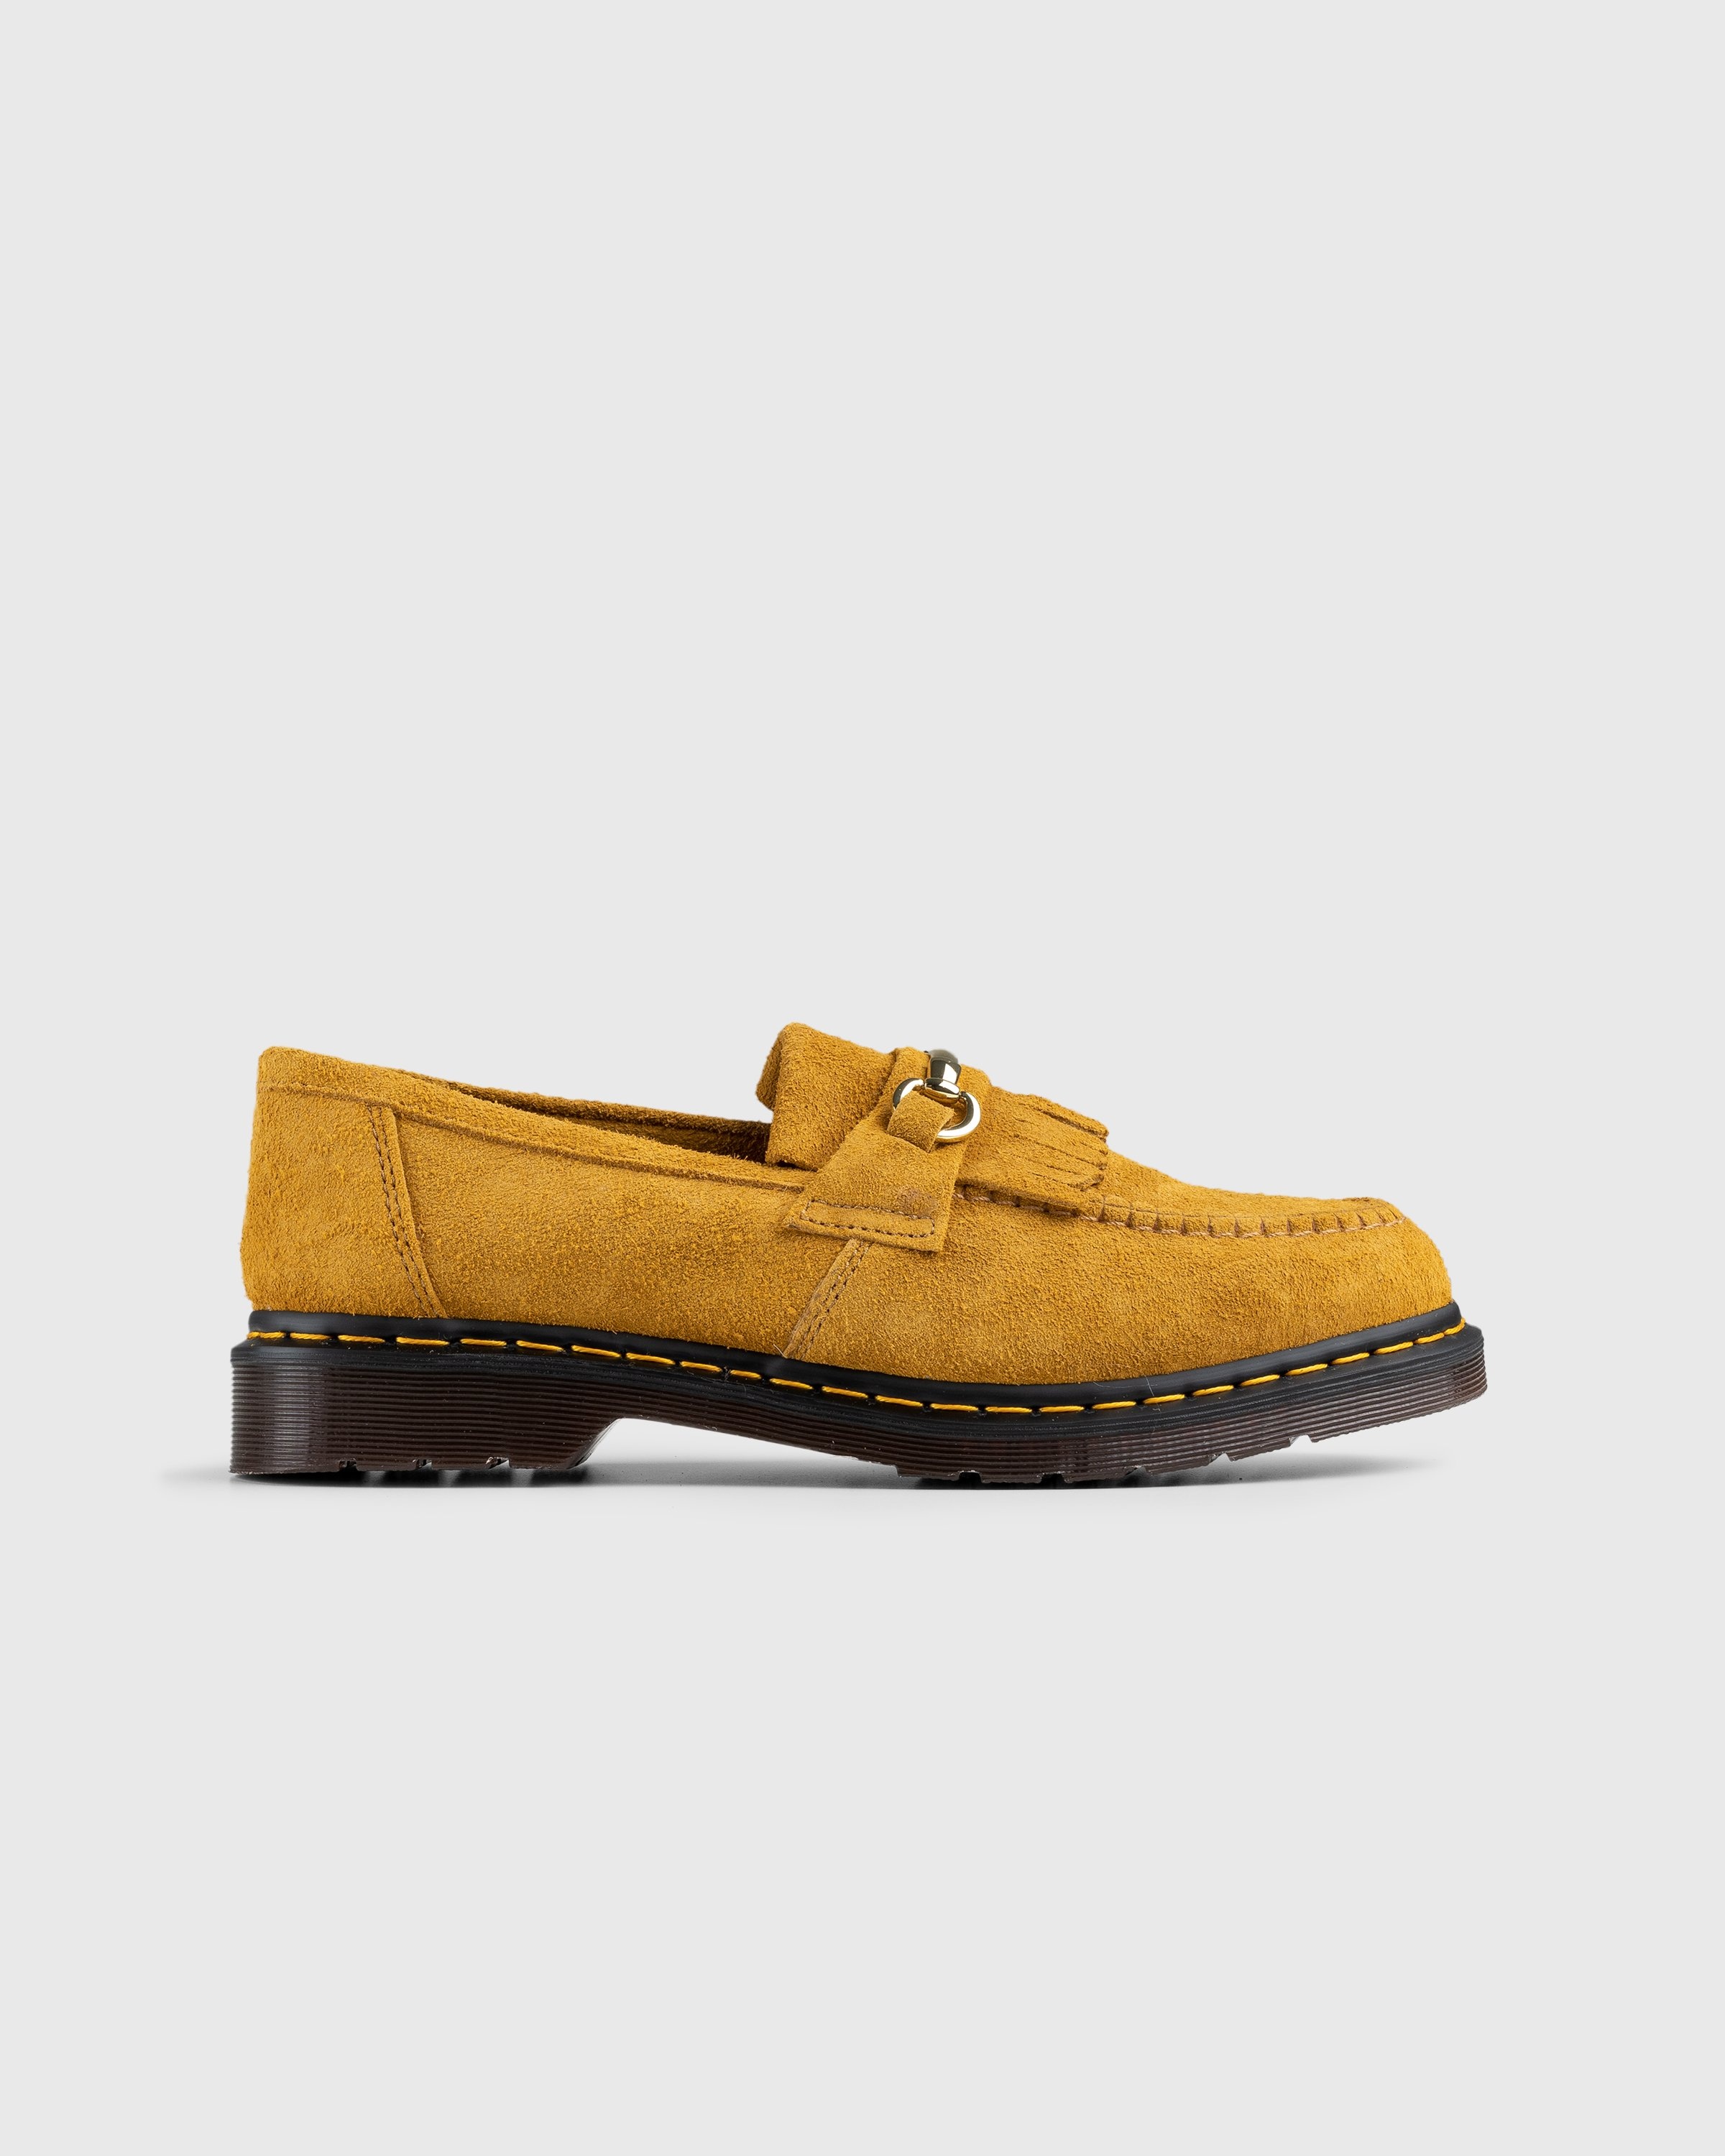 Dr. Martens – Adrian Snaffle Suede Loafers Light Tan Desert Oasis Suede (Gum Oil) - Shoes - Brown - Image 1